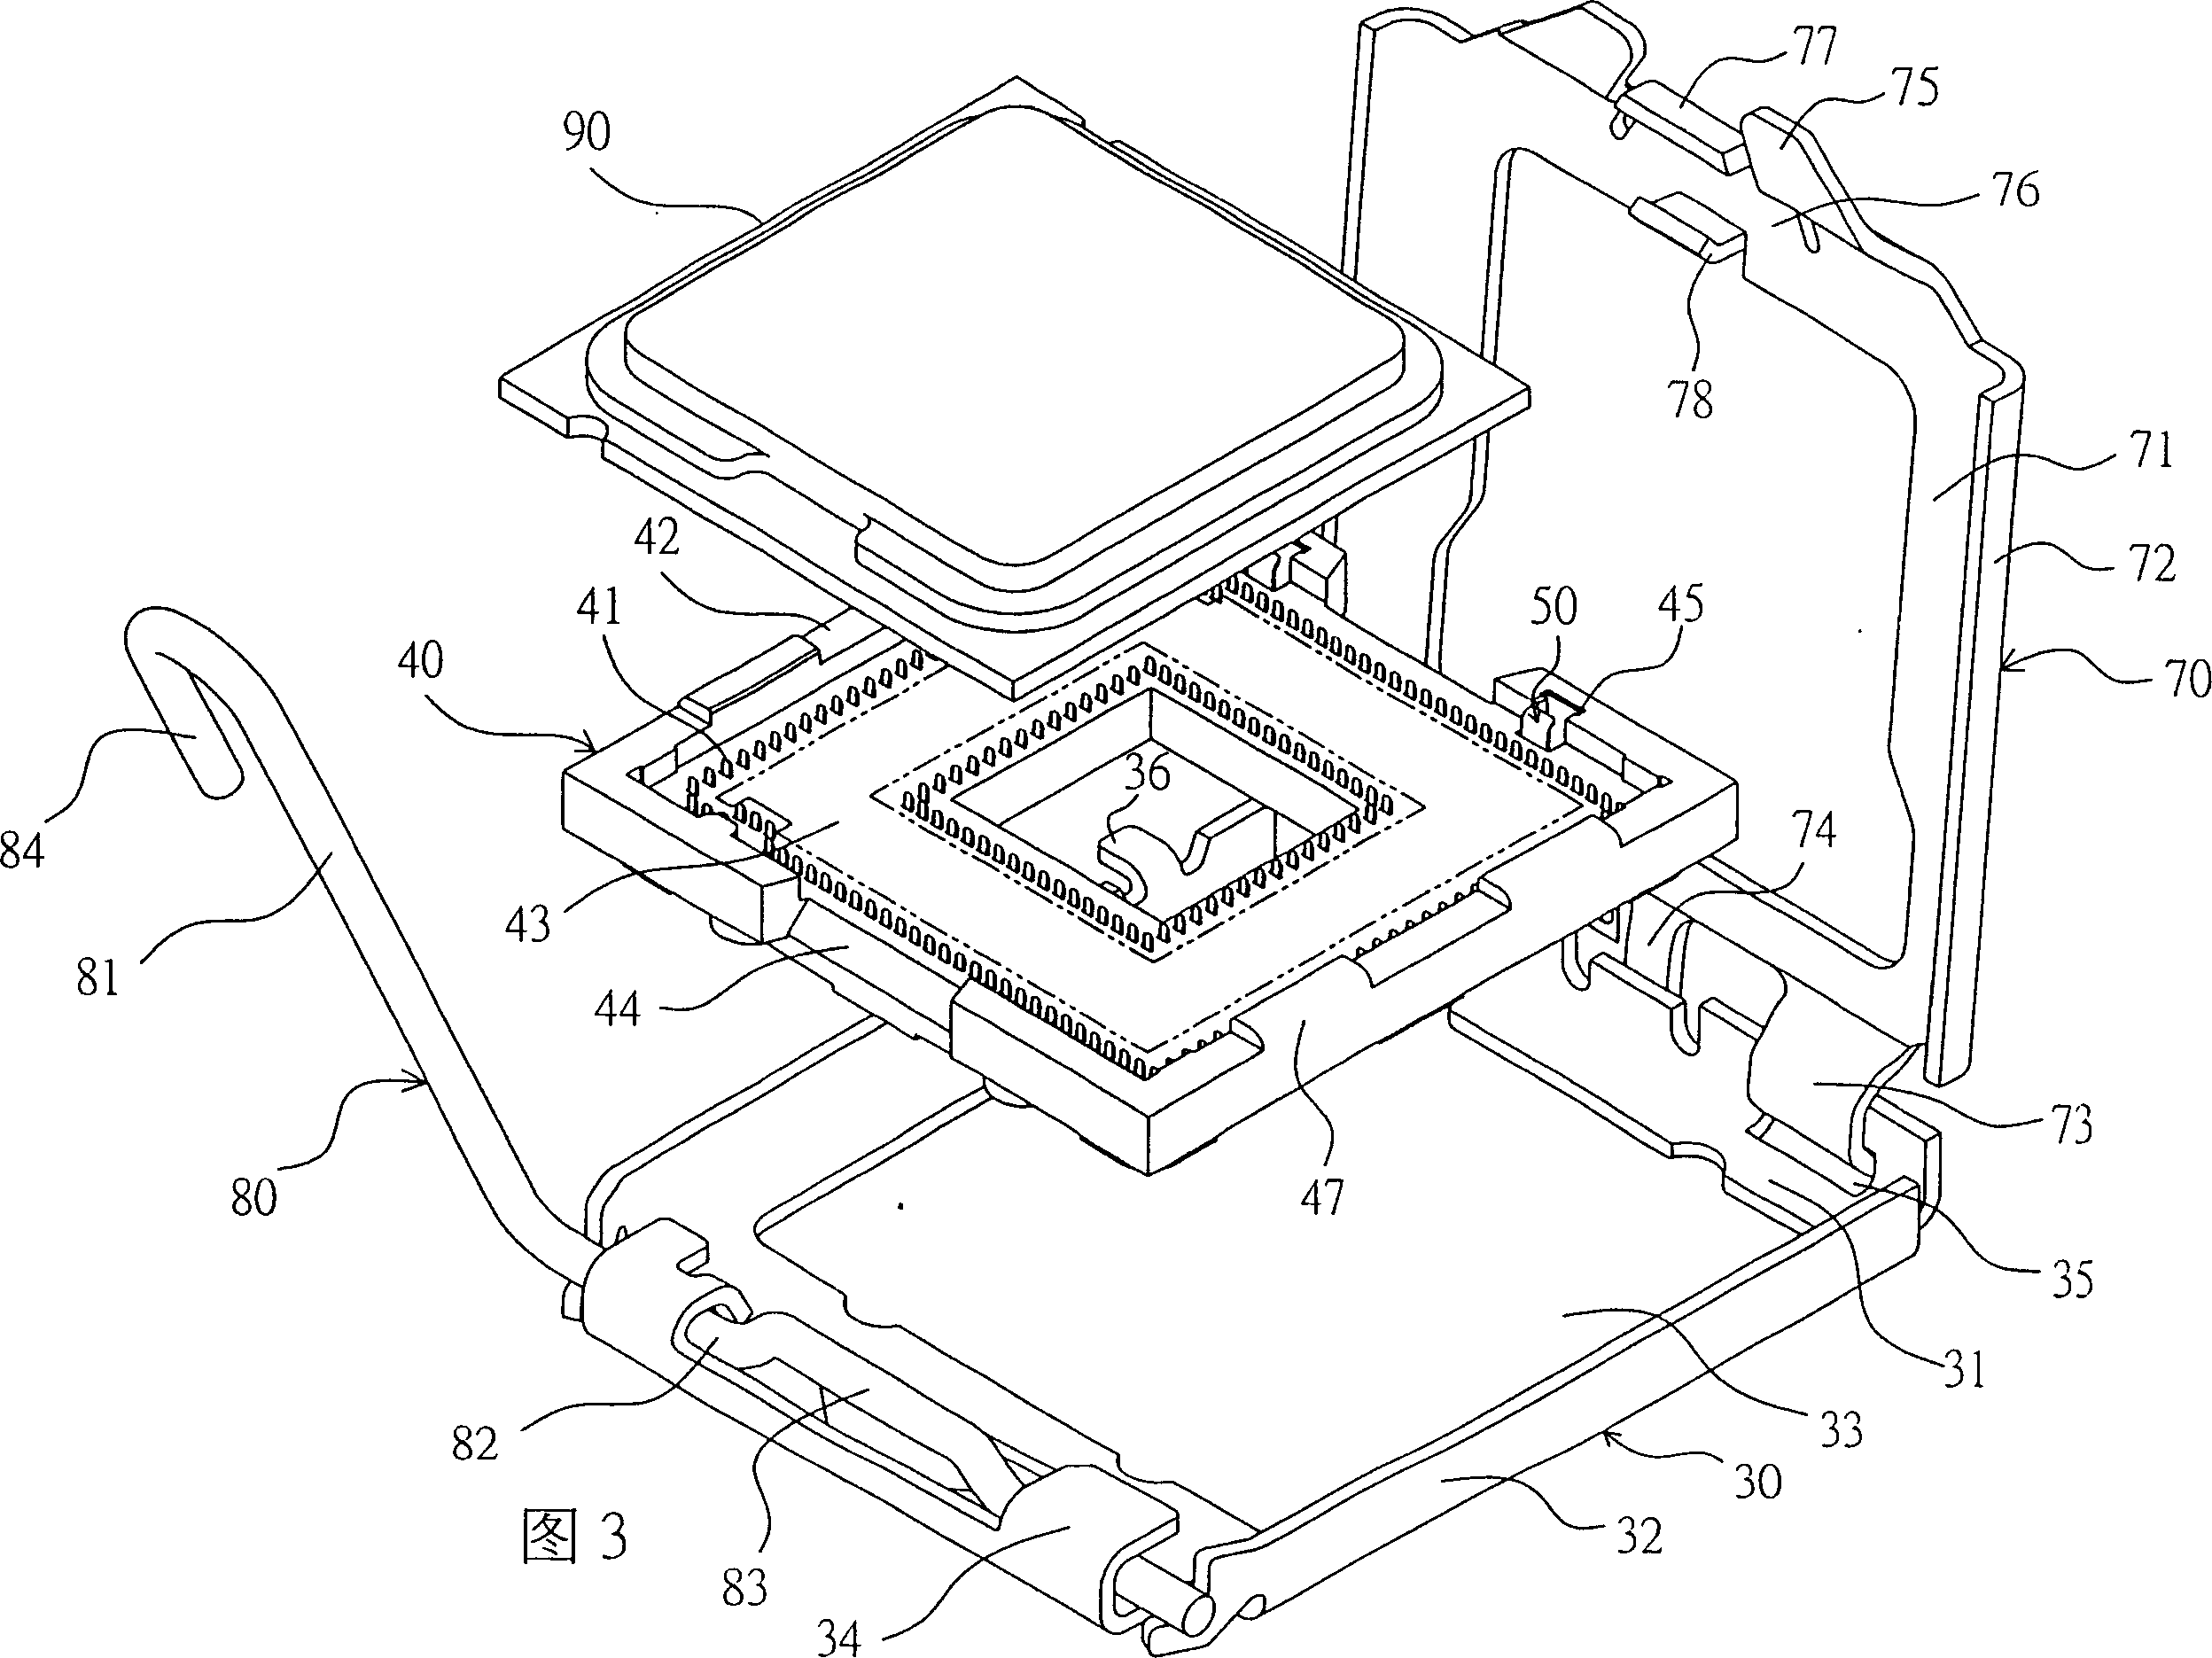 Wafer connector